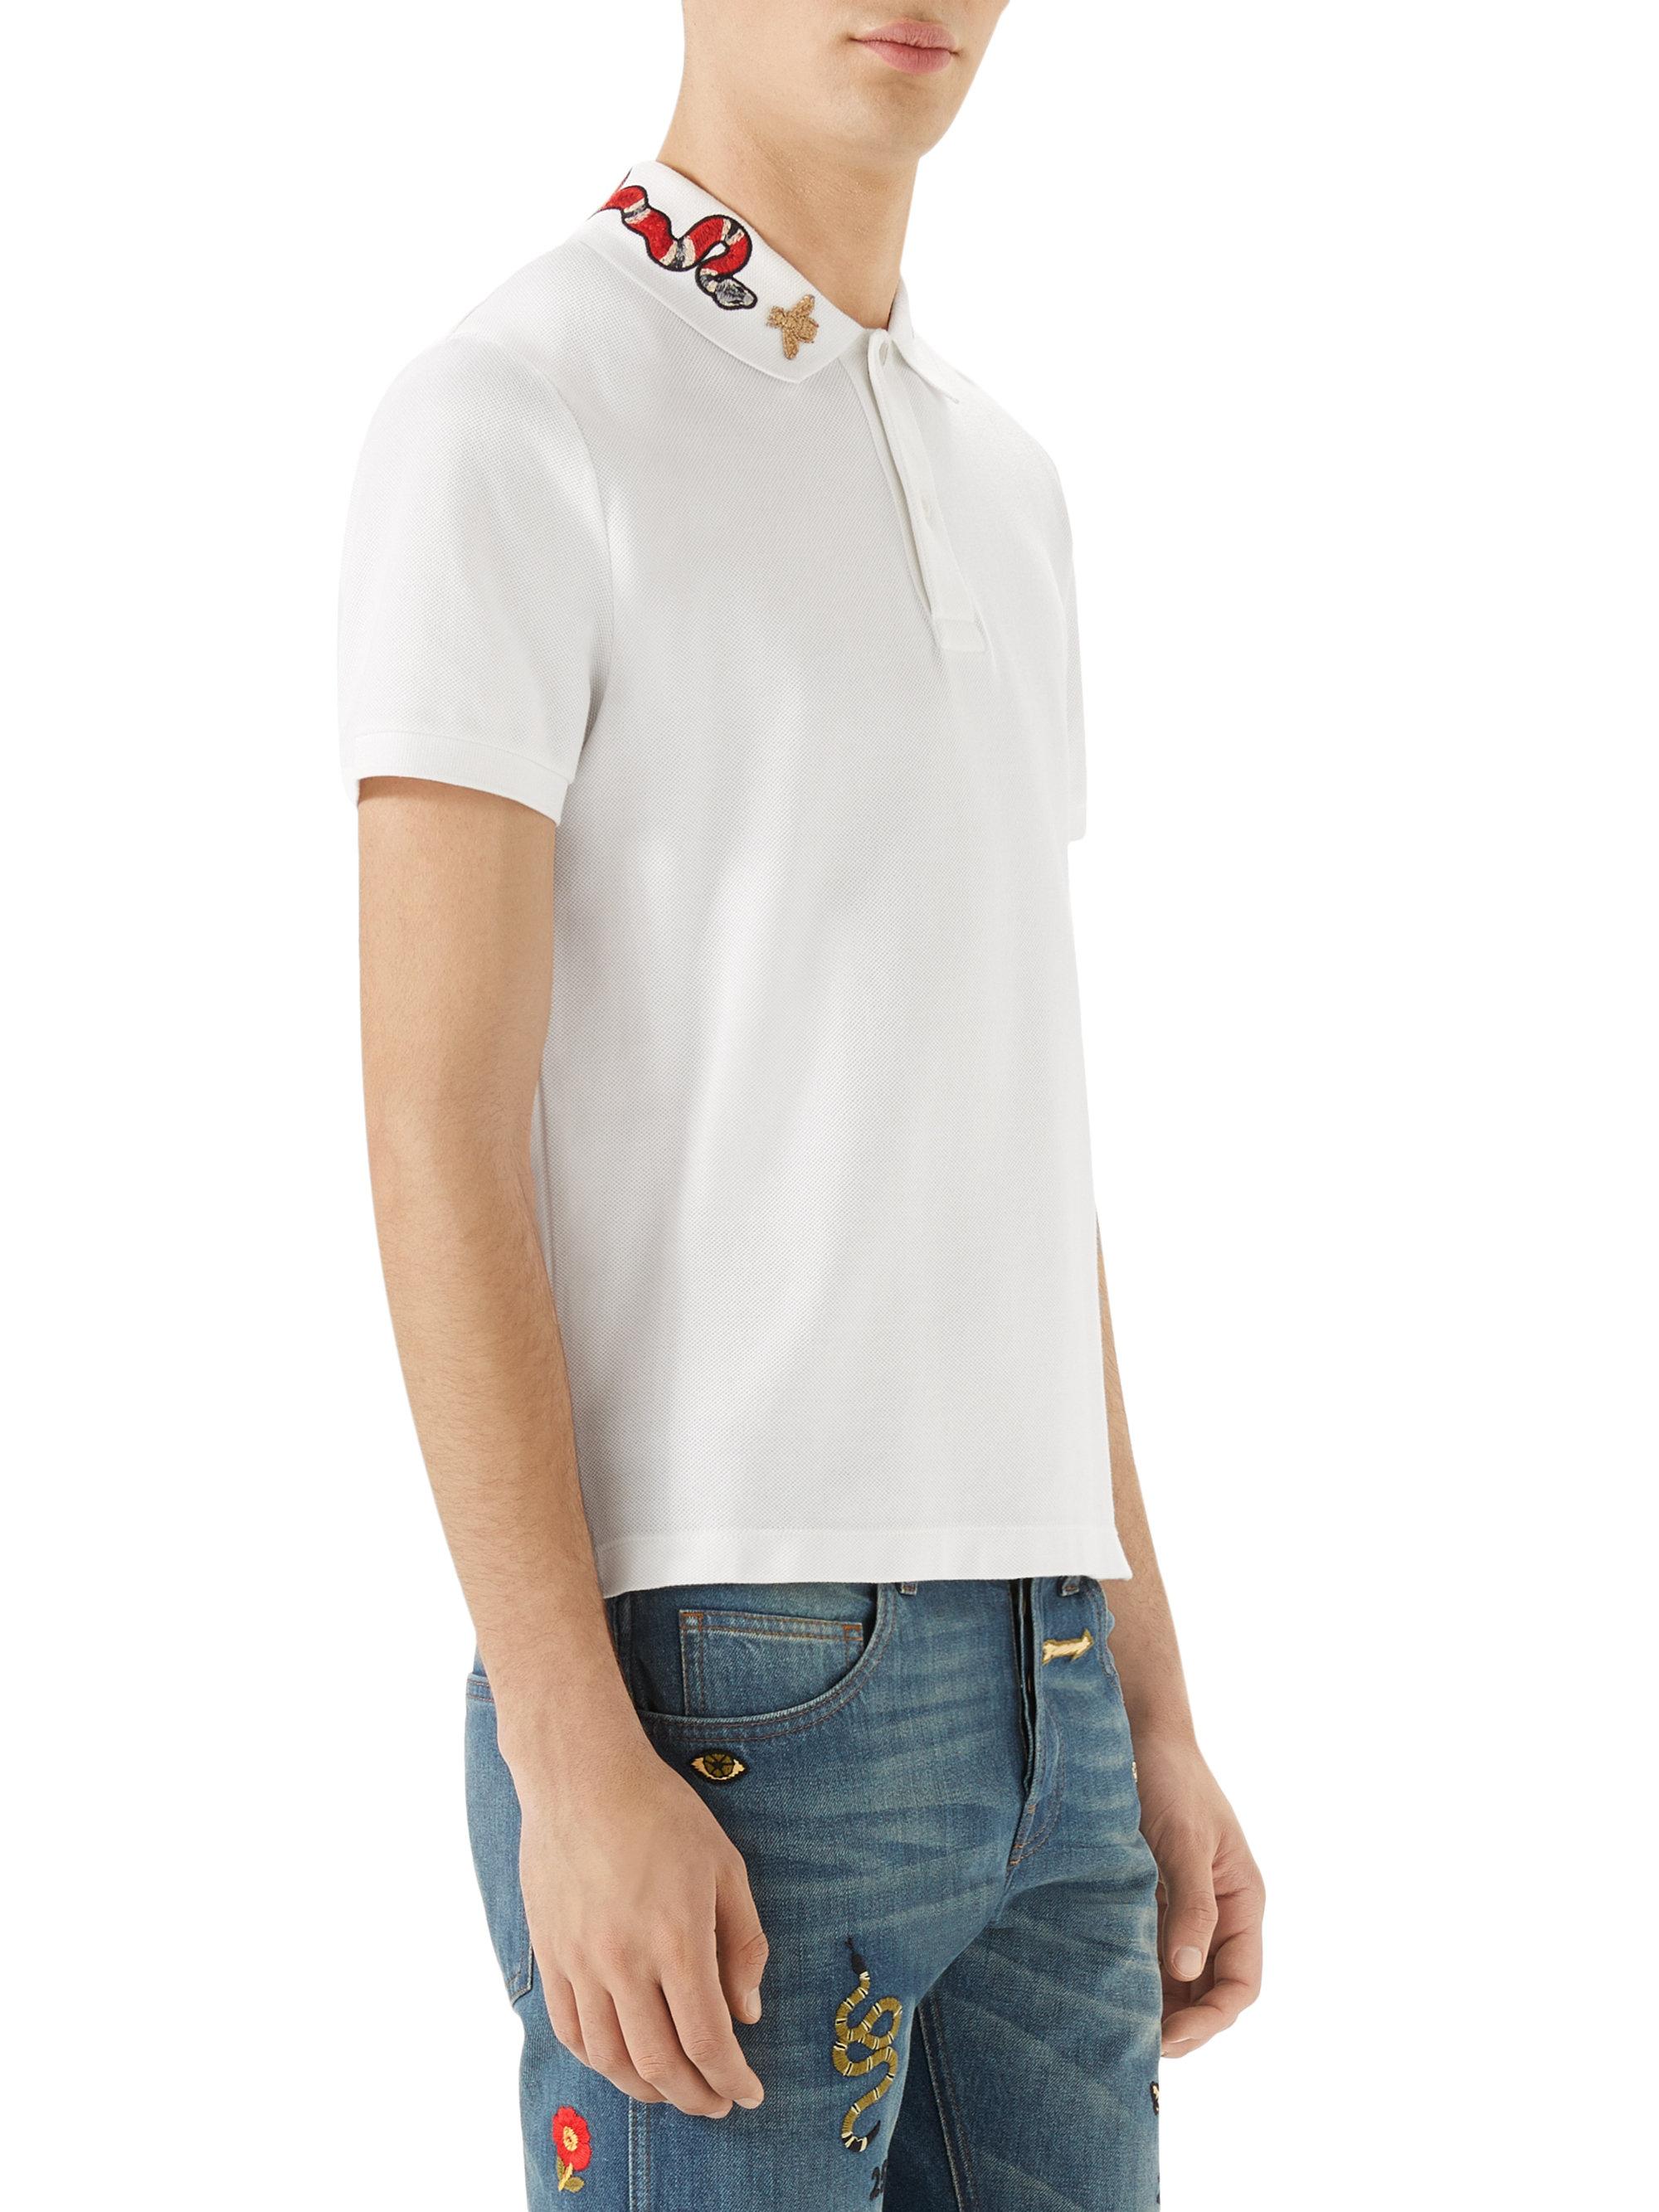 Gucci Embroidered Polo Shirt in White Men - Lyst